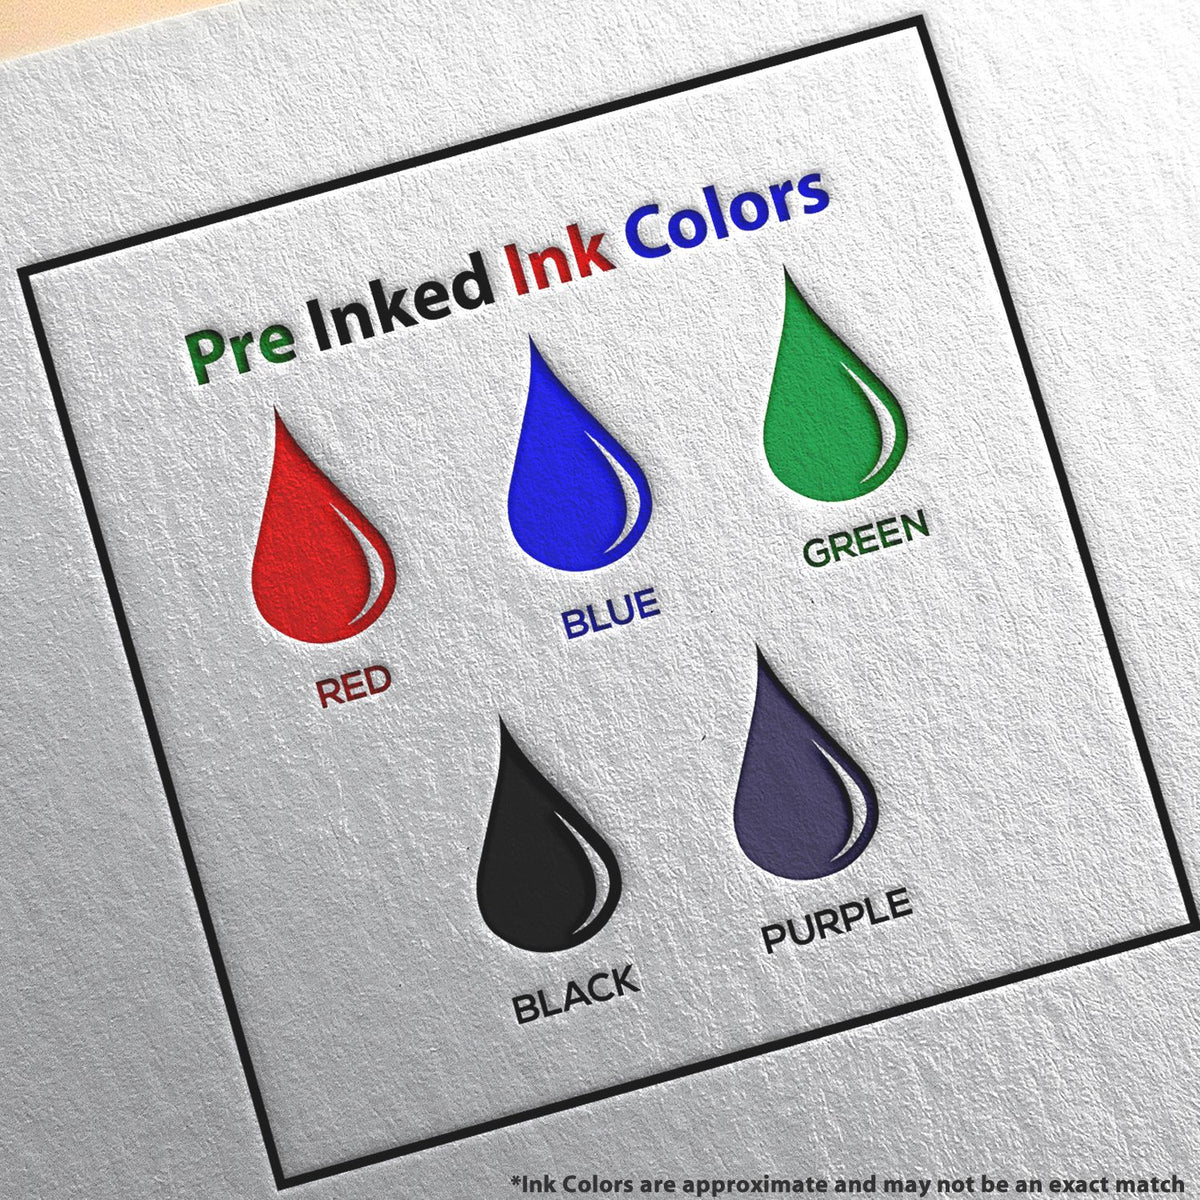 A picture showing the different ink colors or hues available for the Slim Pre-Inked Mississippi Landscape Architect Seal Stamp product.